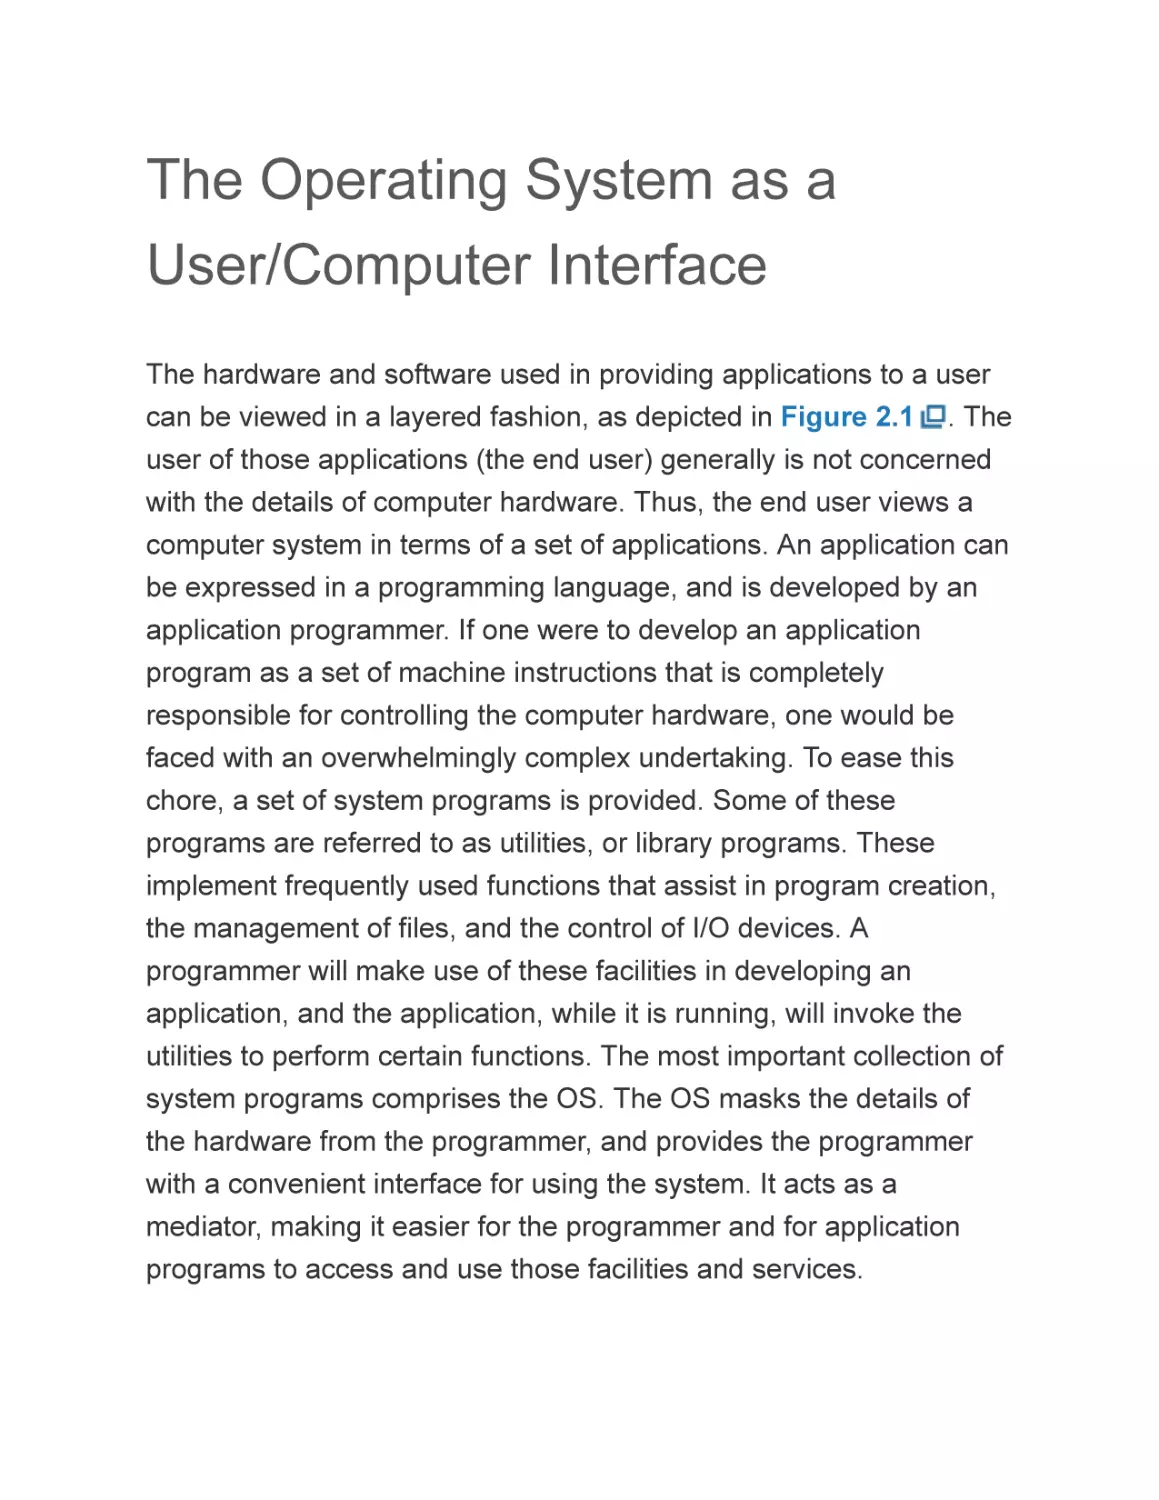 The Operating System as a User/Computer Interface